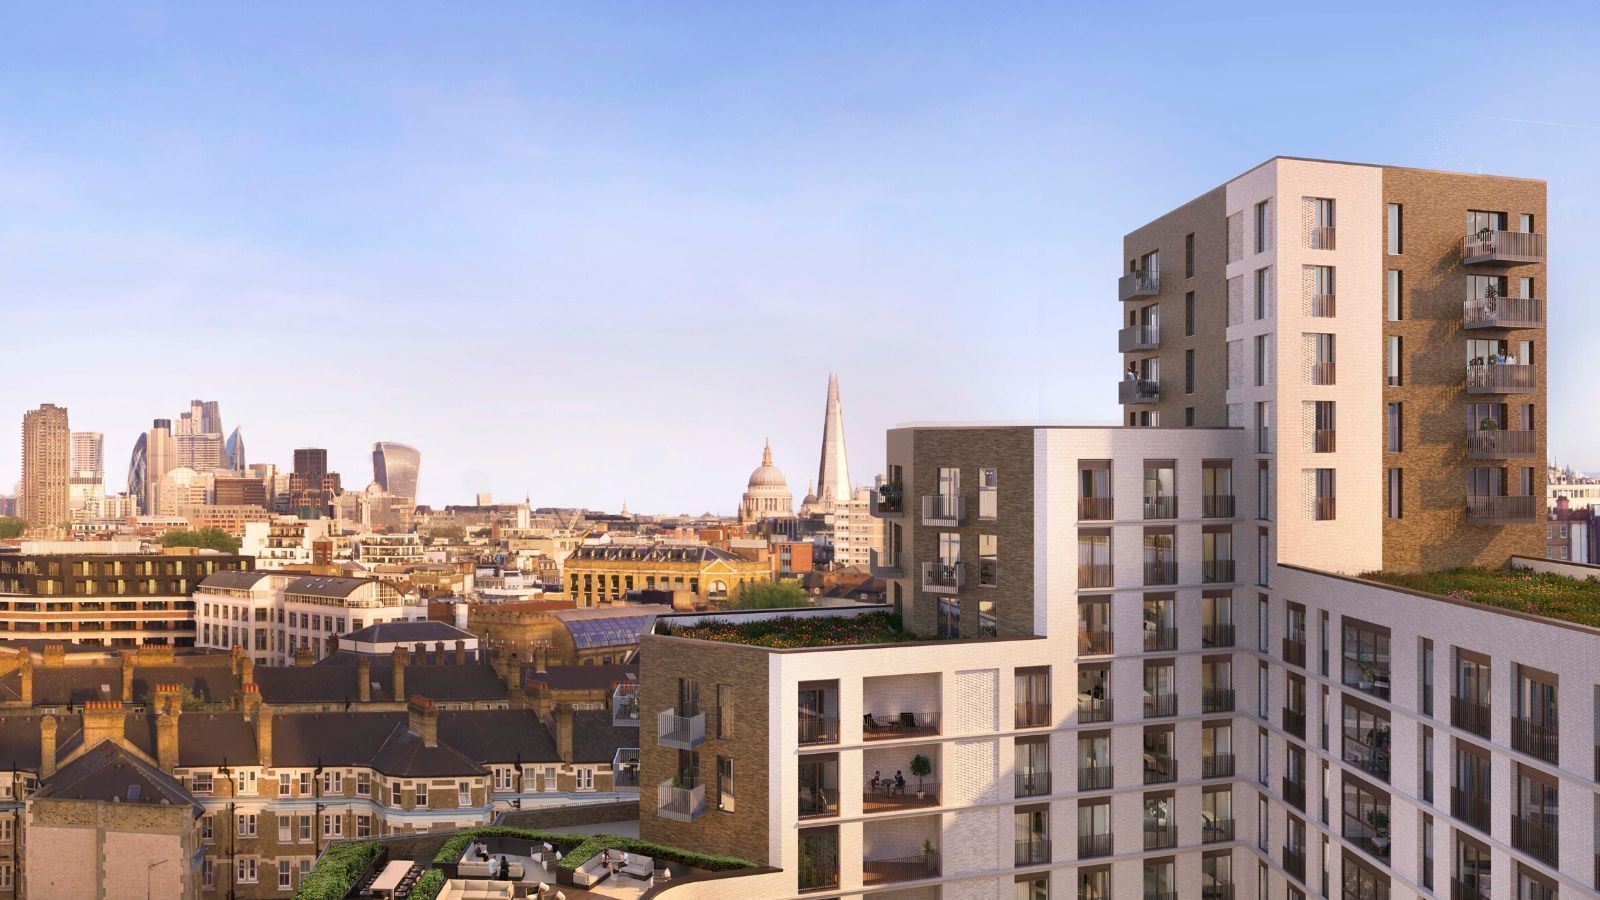 A new neighborhood in the heart of London